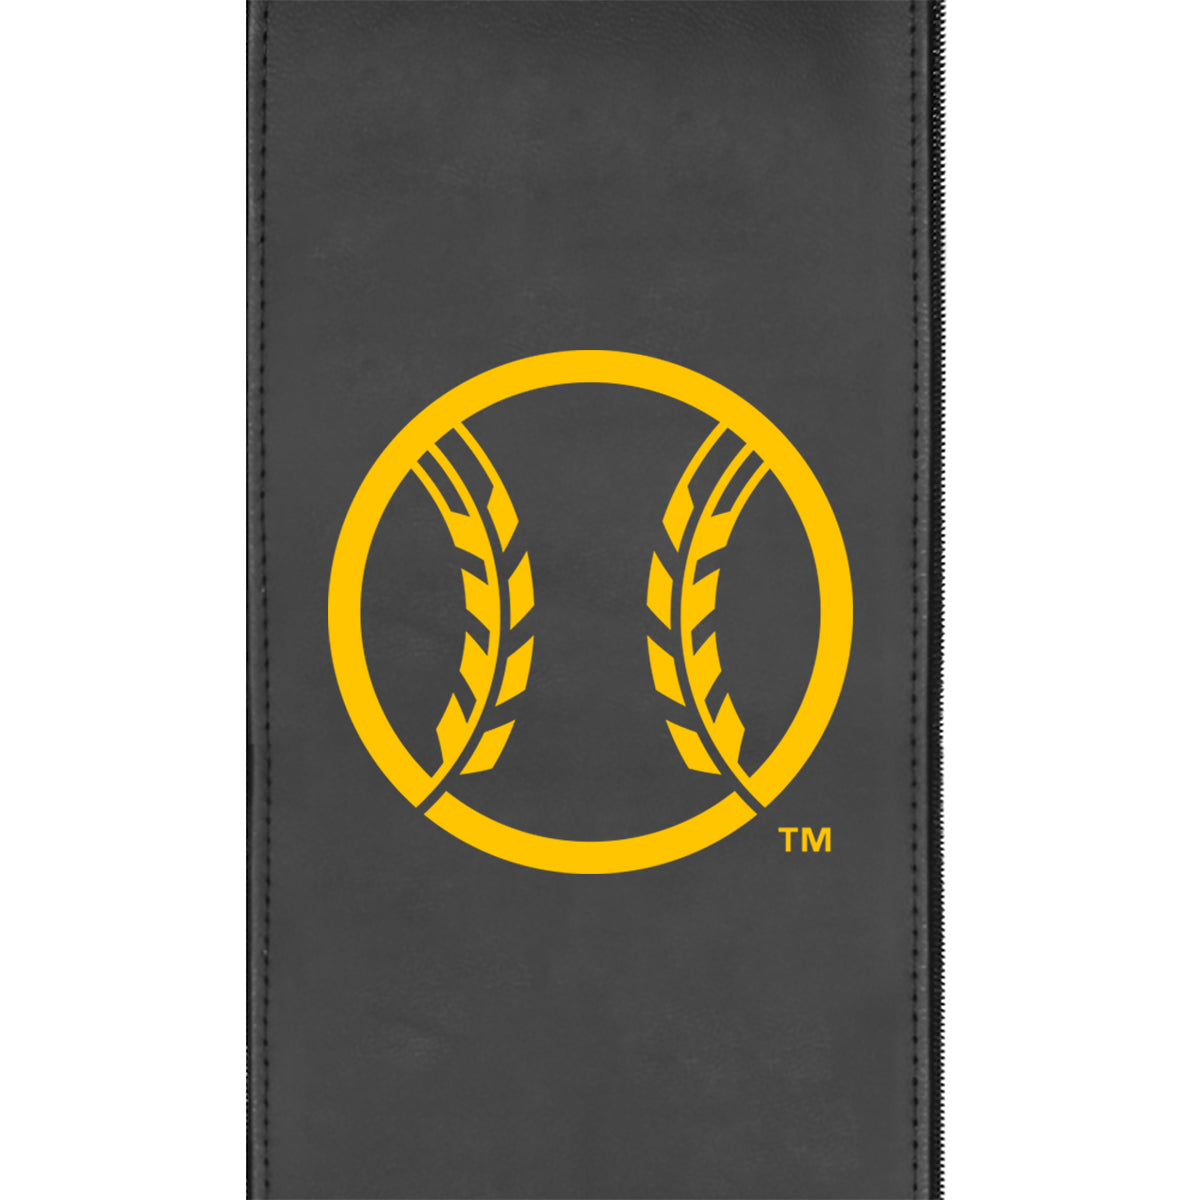 Game Rocker 100 with Milwaukee Brewers Secondary Logo